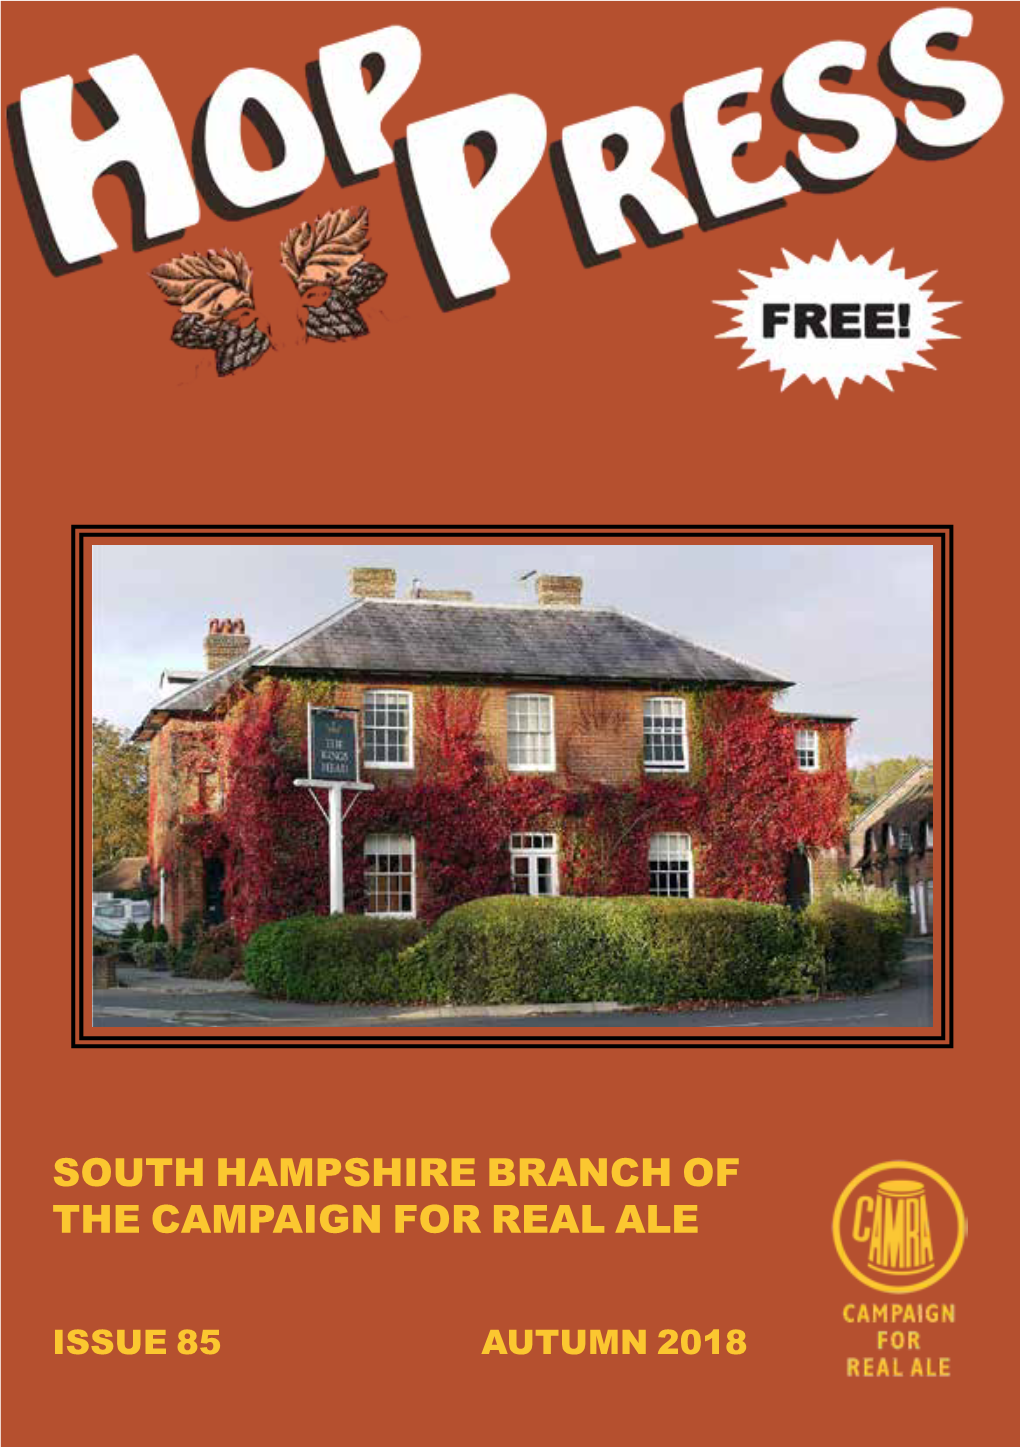 South Hampshire Branch of the Campaign for Real Ale